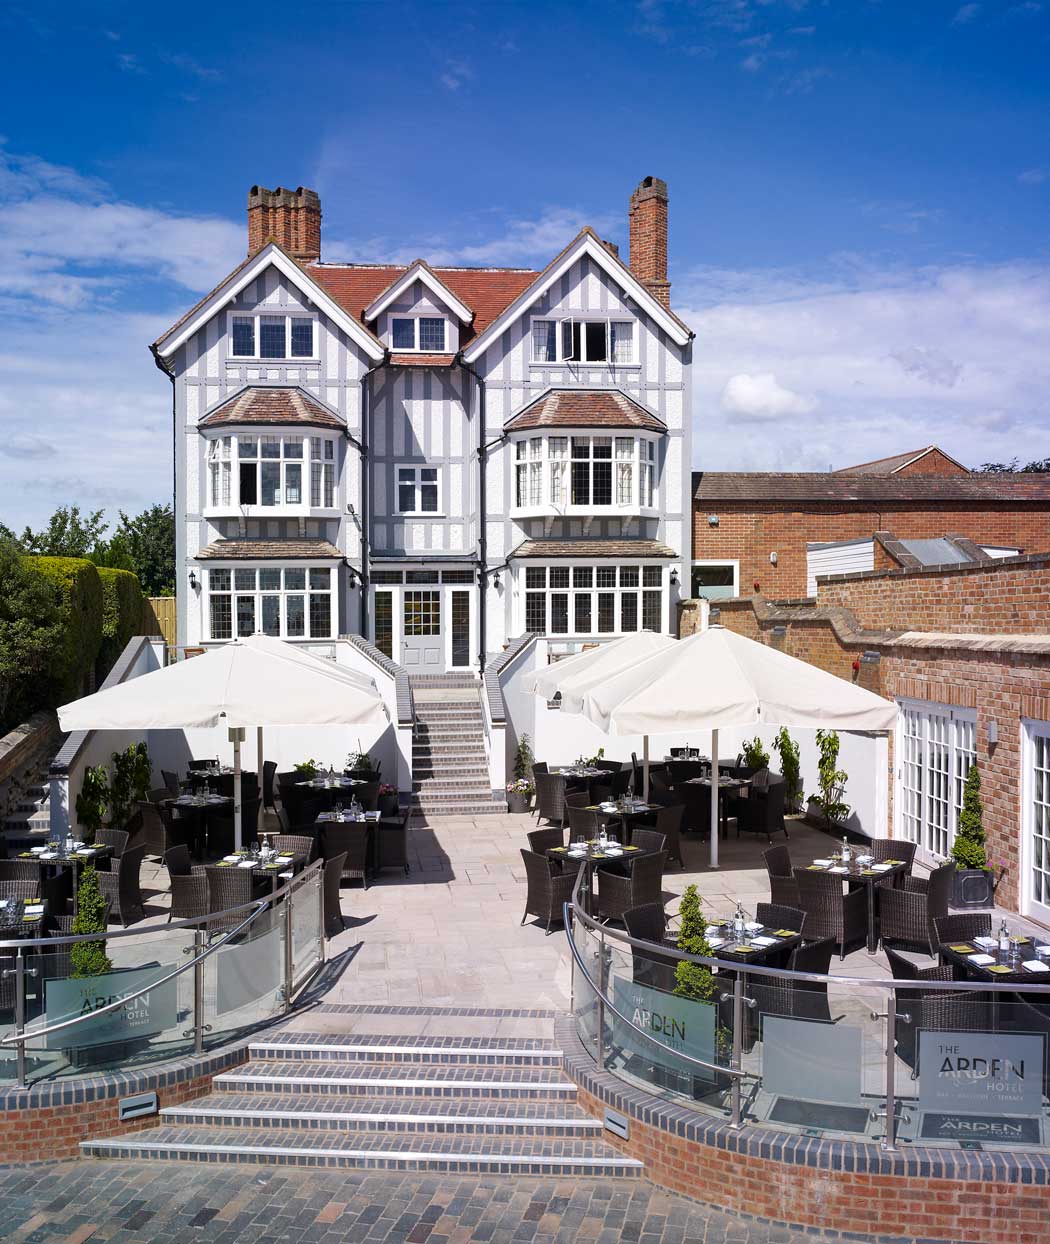 The terrace is a lovely spot for a drink or a bite to eat on a sunny day. (Photo: The Arden Hotel)